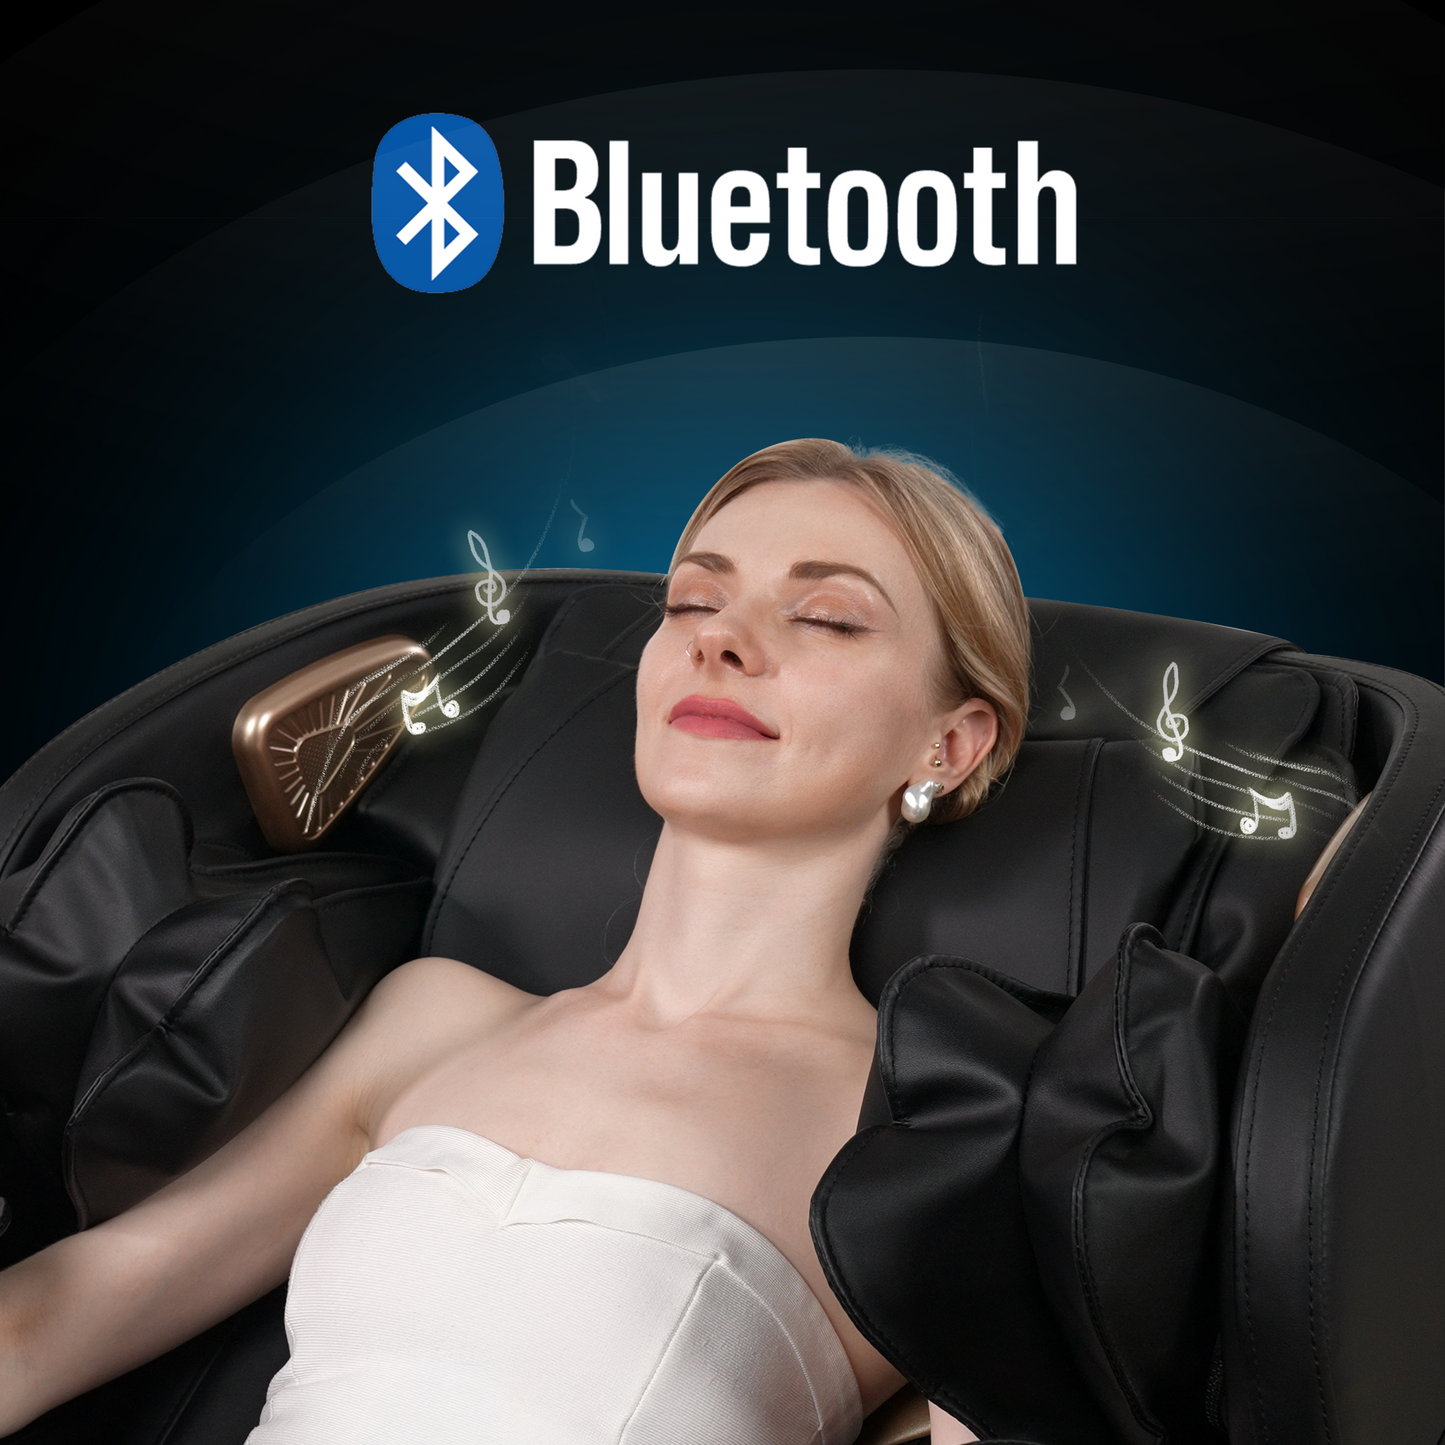 Full Body Massage Chair With Zero Gravity Recliner and two control panels